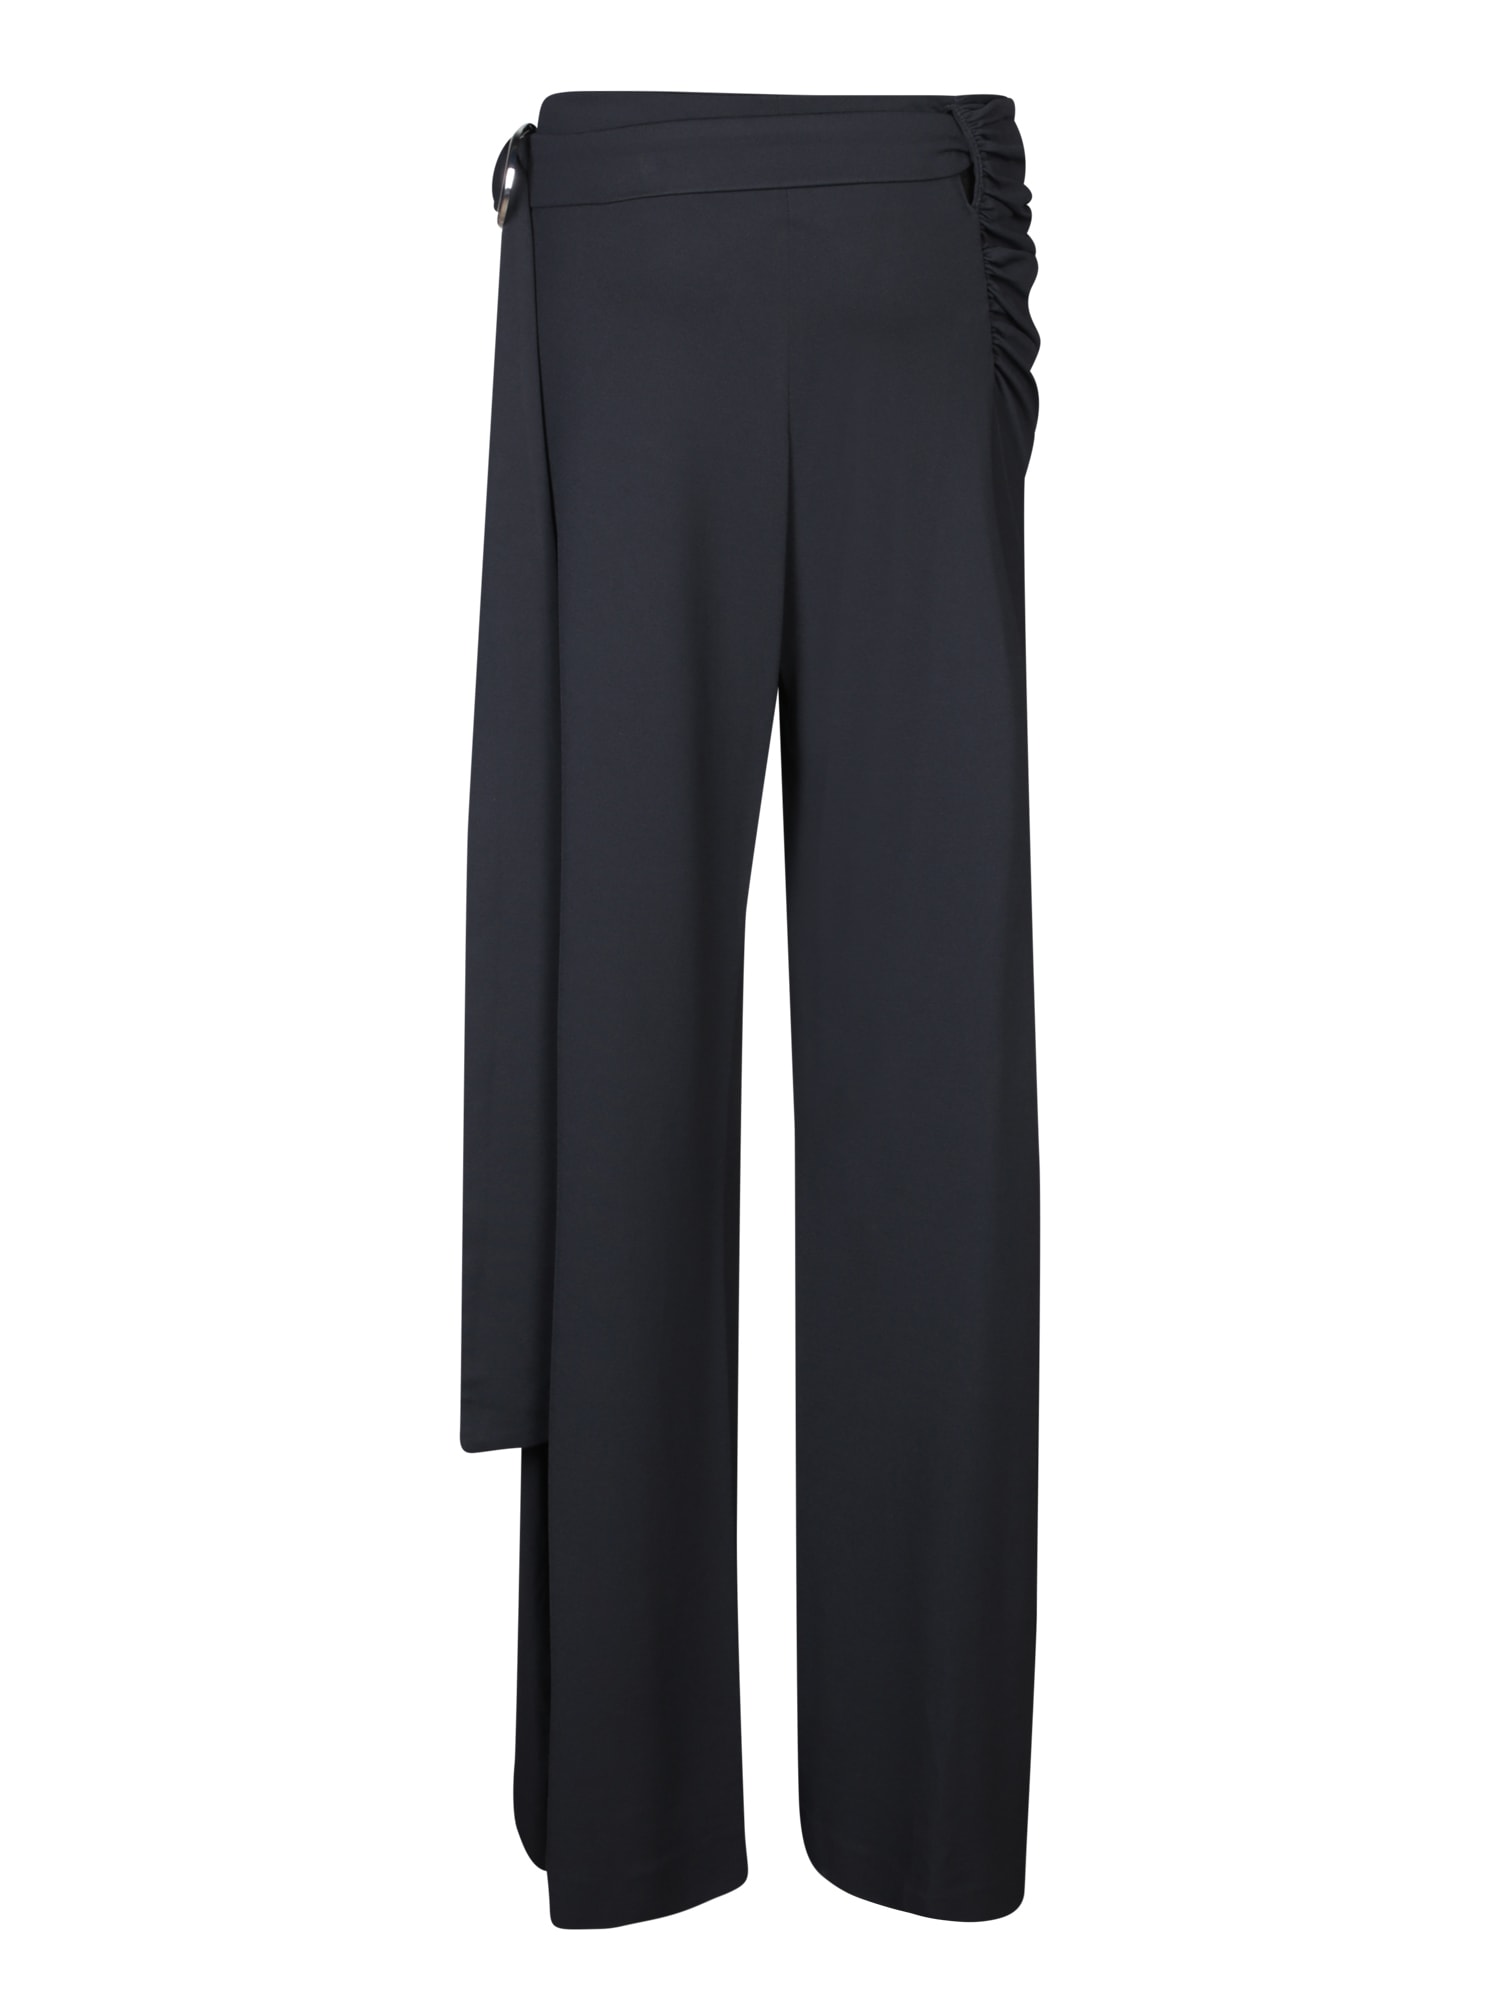 Shop Paco Rabanne Black Jersey Knotted Trousers -